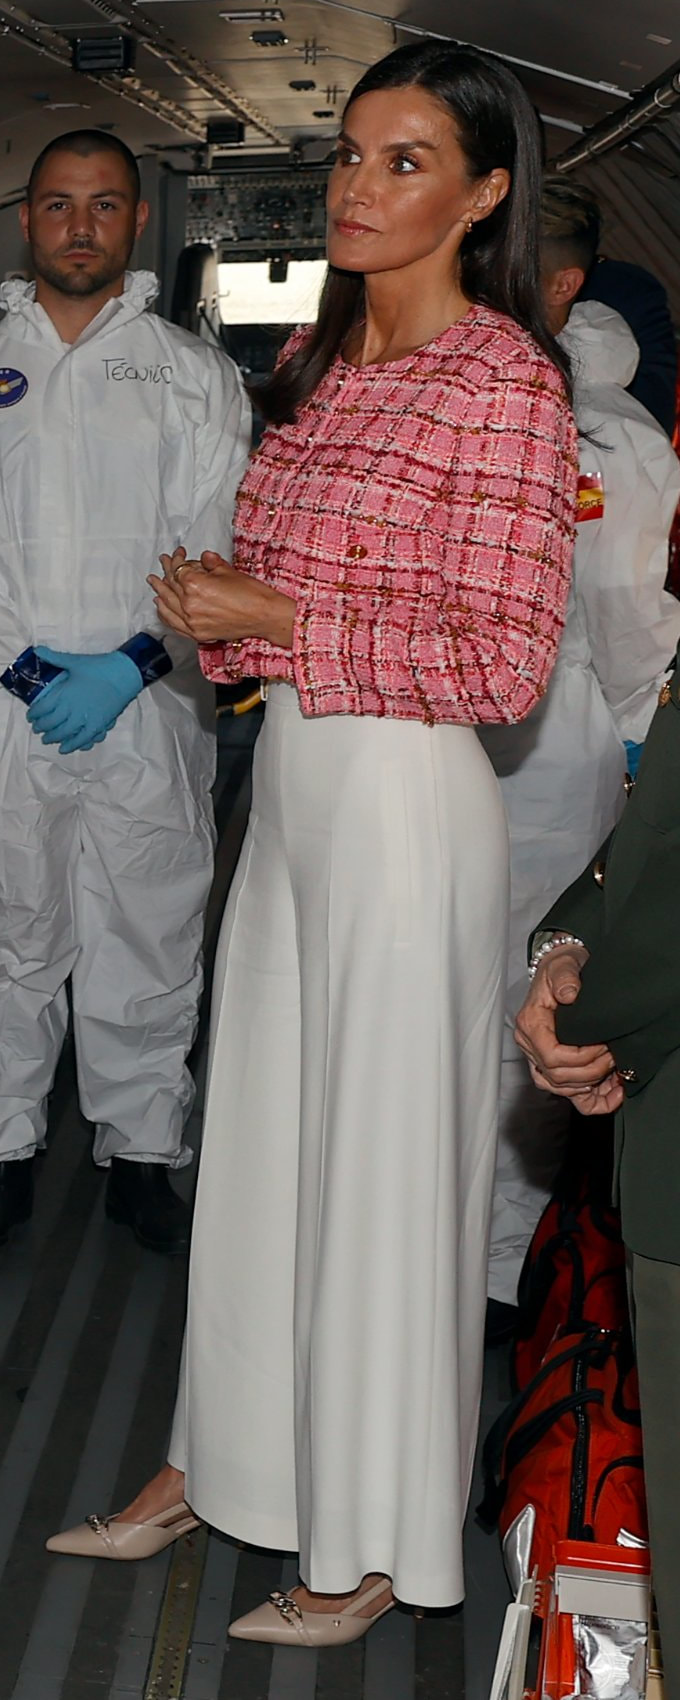 Martinelli Fontaine Slingback Pumps in Stone as seen on Queen Letizia.